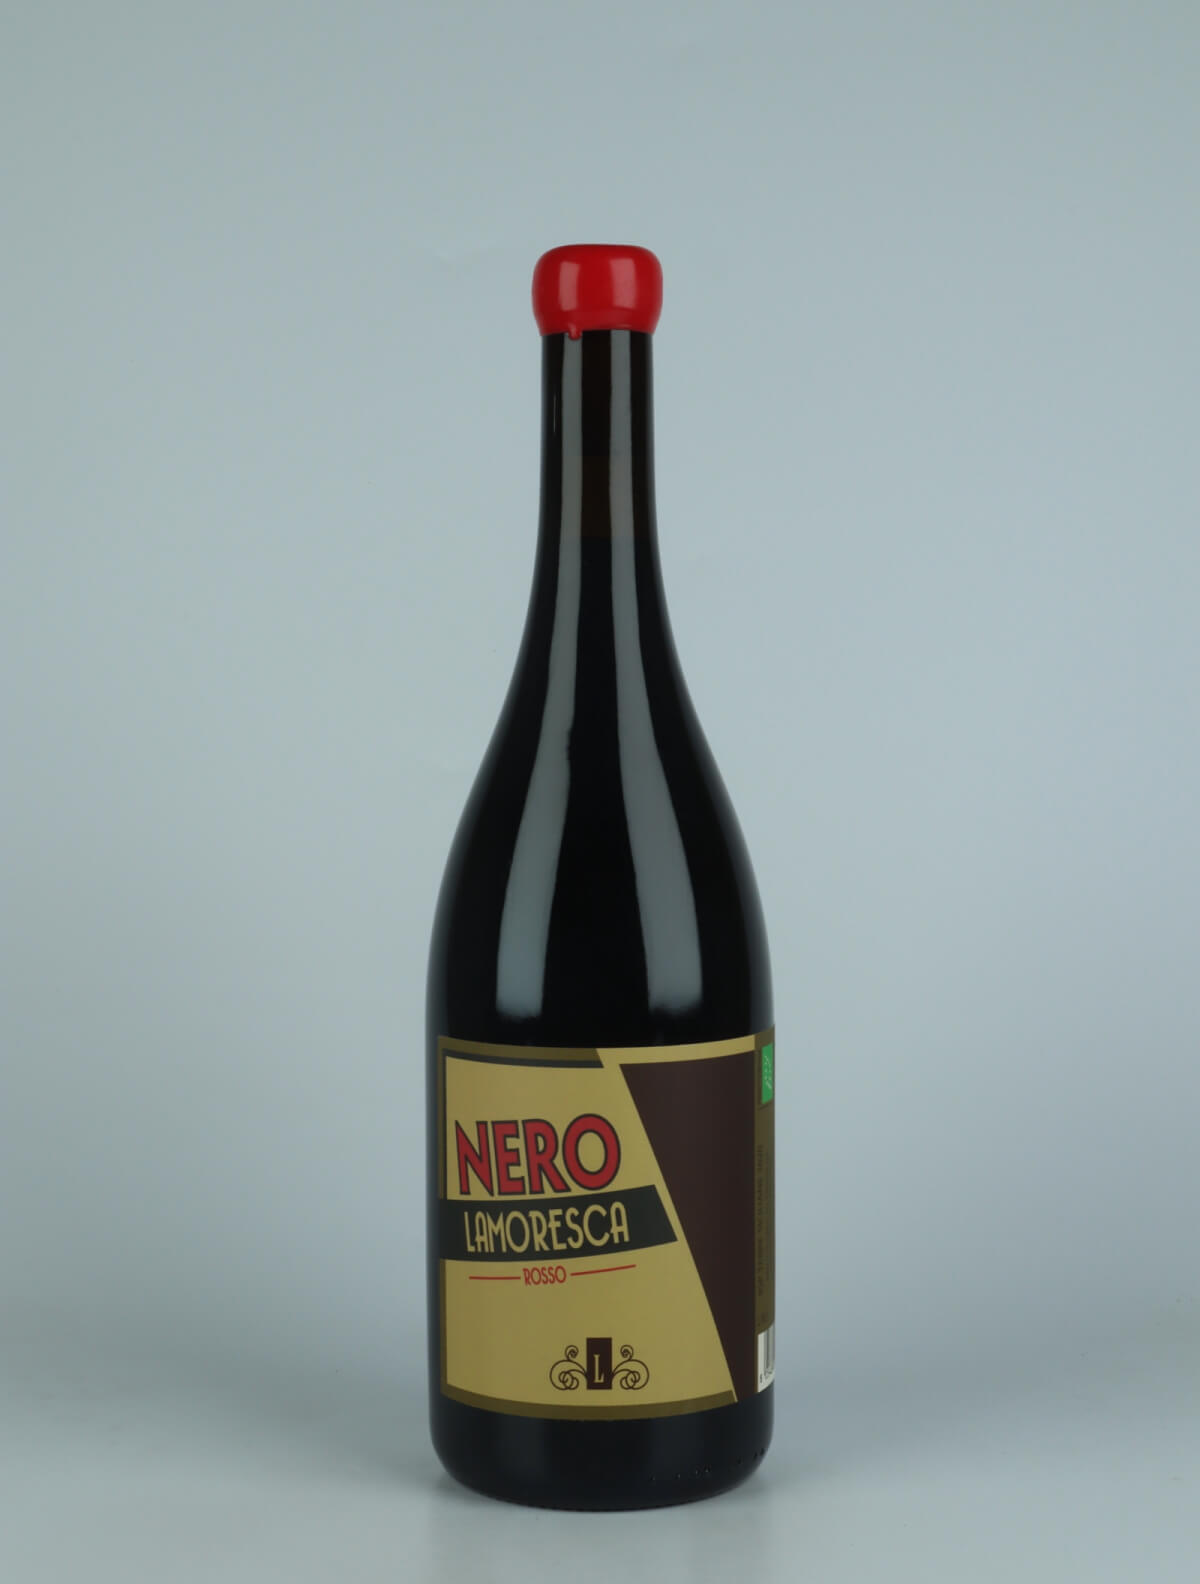 A bottle 2020 Nero Red wine from Lamoresca, Sicily in Italy